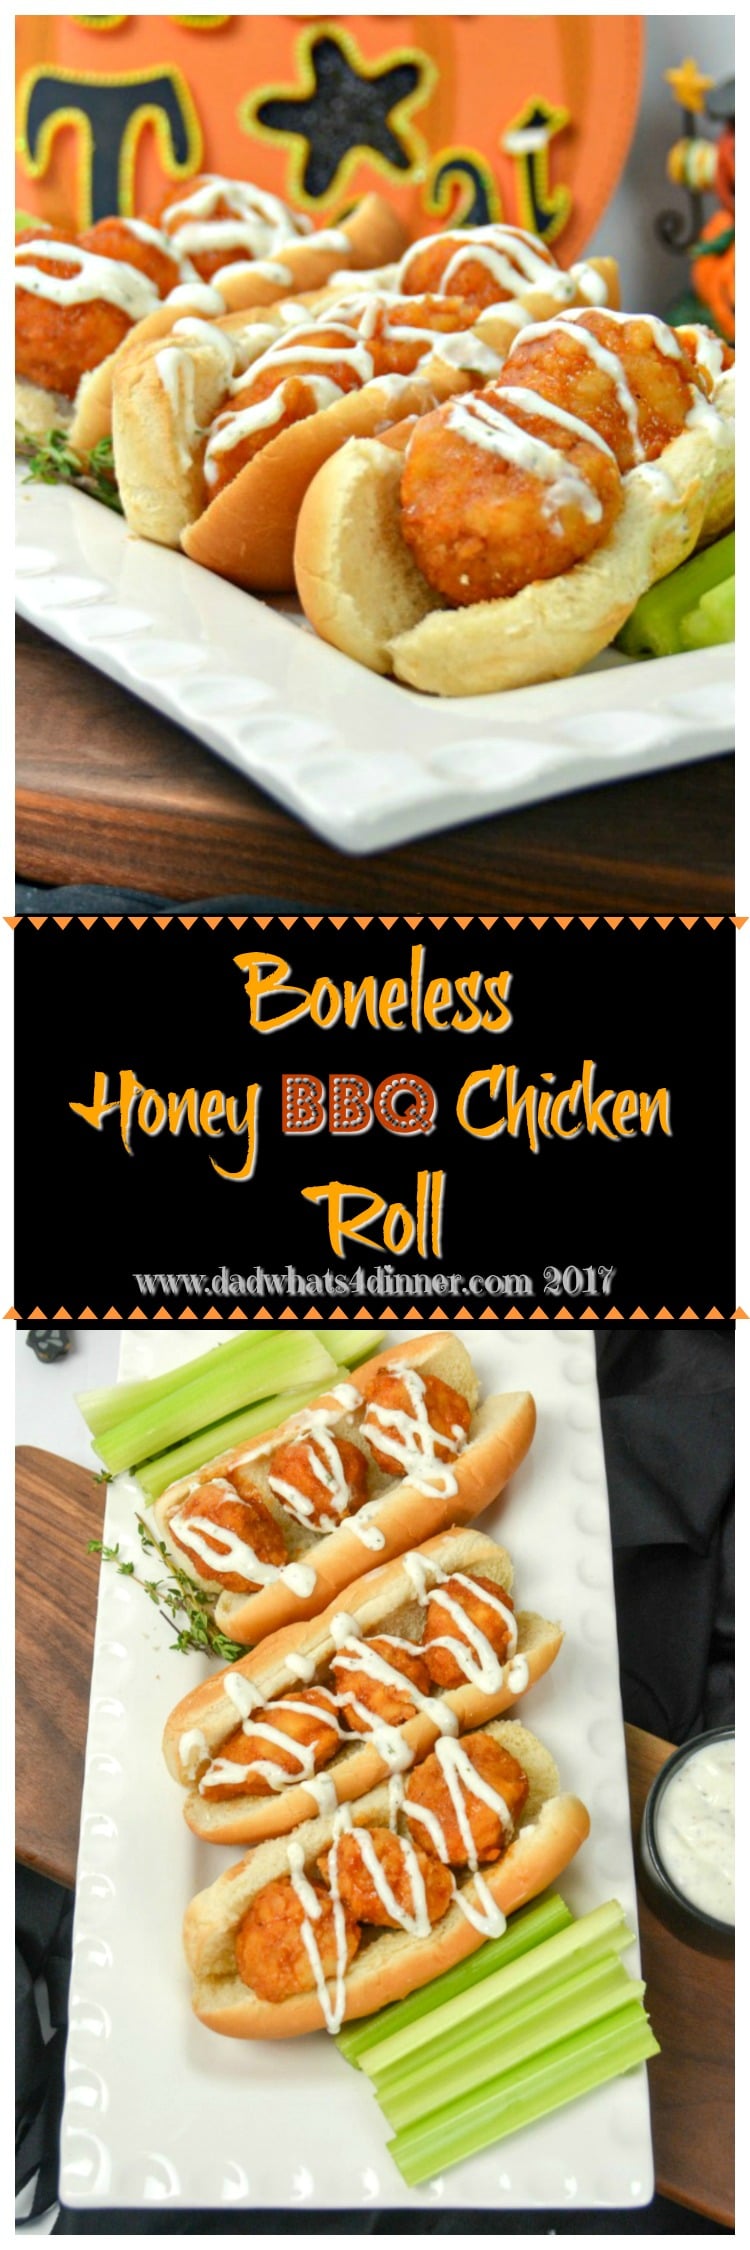 Try these Boneless Honey BBQ Chicken Roll with Creamy Ranch Sauce for a quick and simple trick or treat night snack you can make with your kids. #boneless #chicken #wings #kid-friendly #buffalo #sliders www.dadwhats4dinner.com 